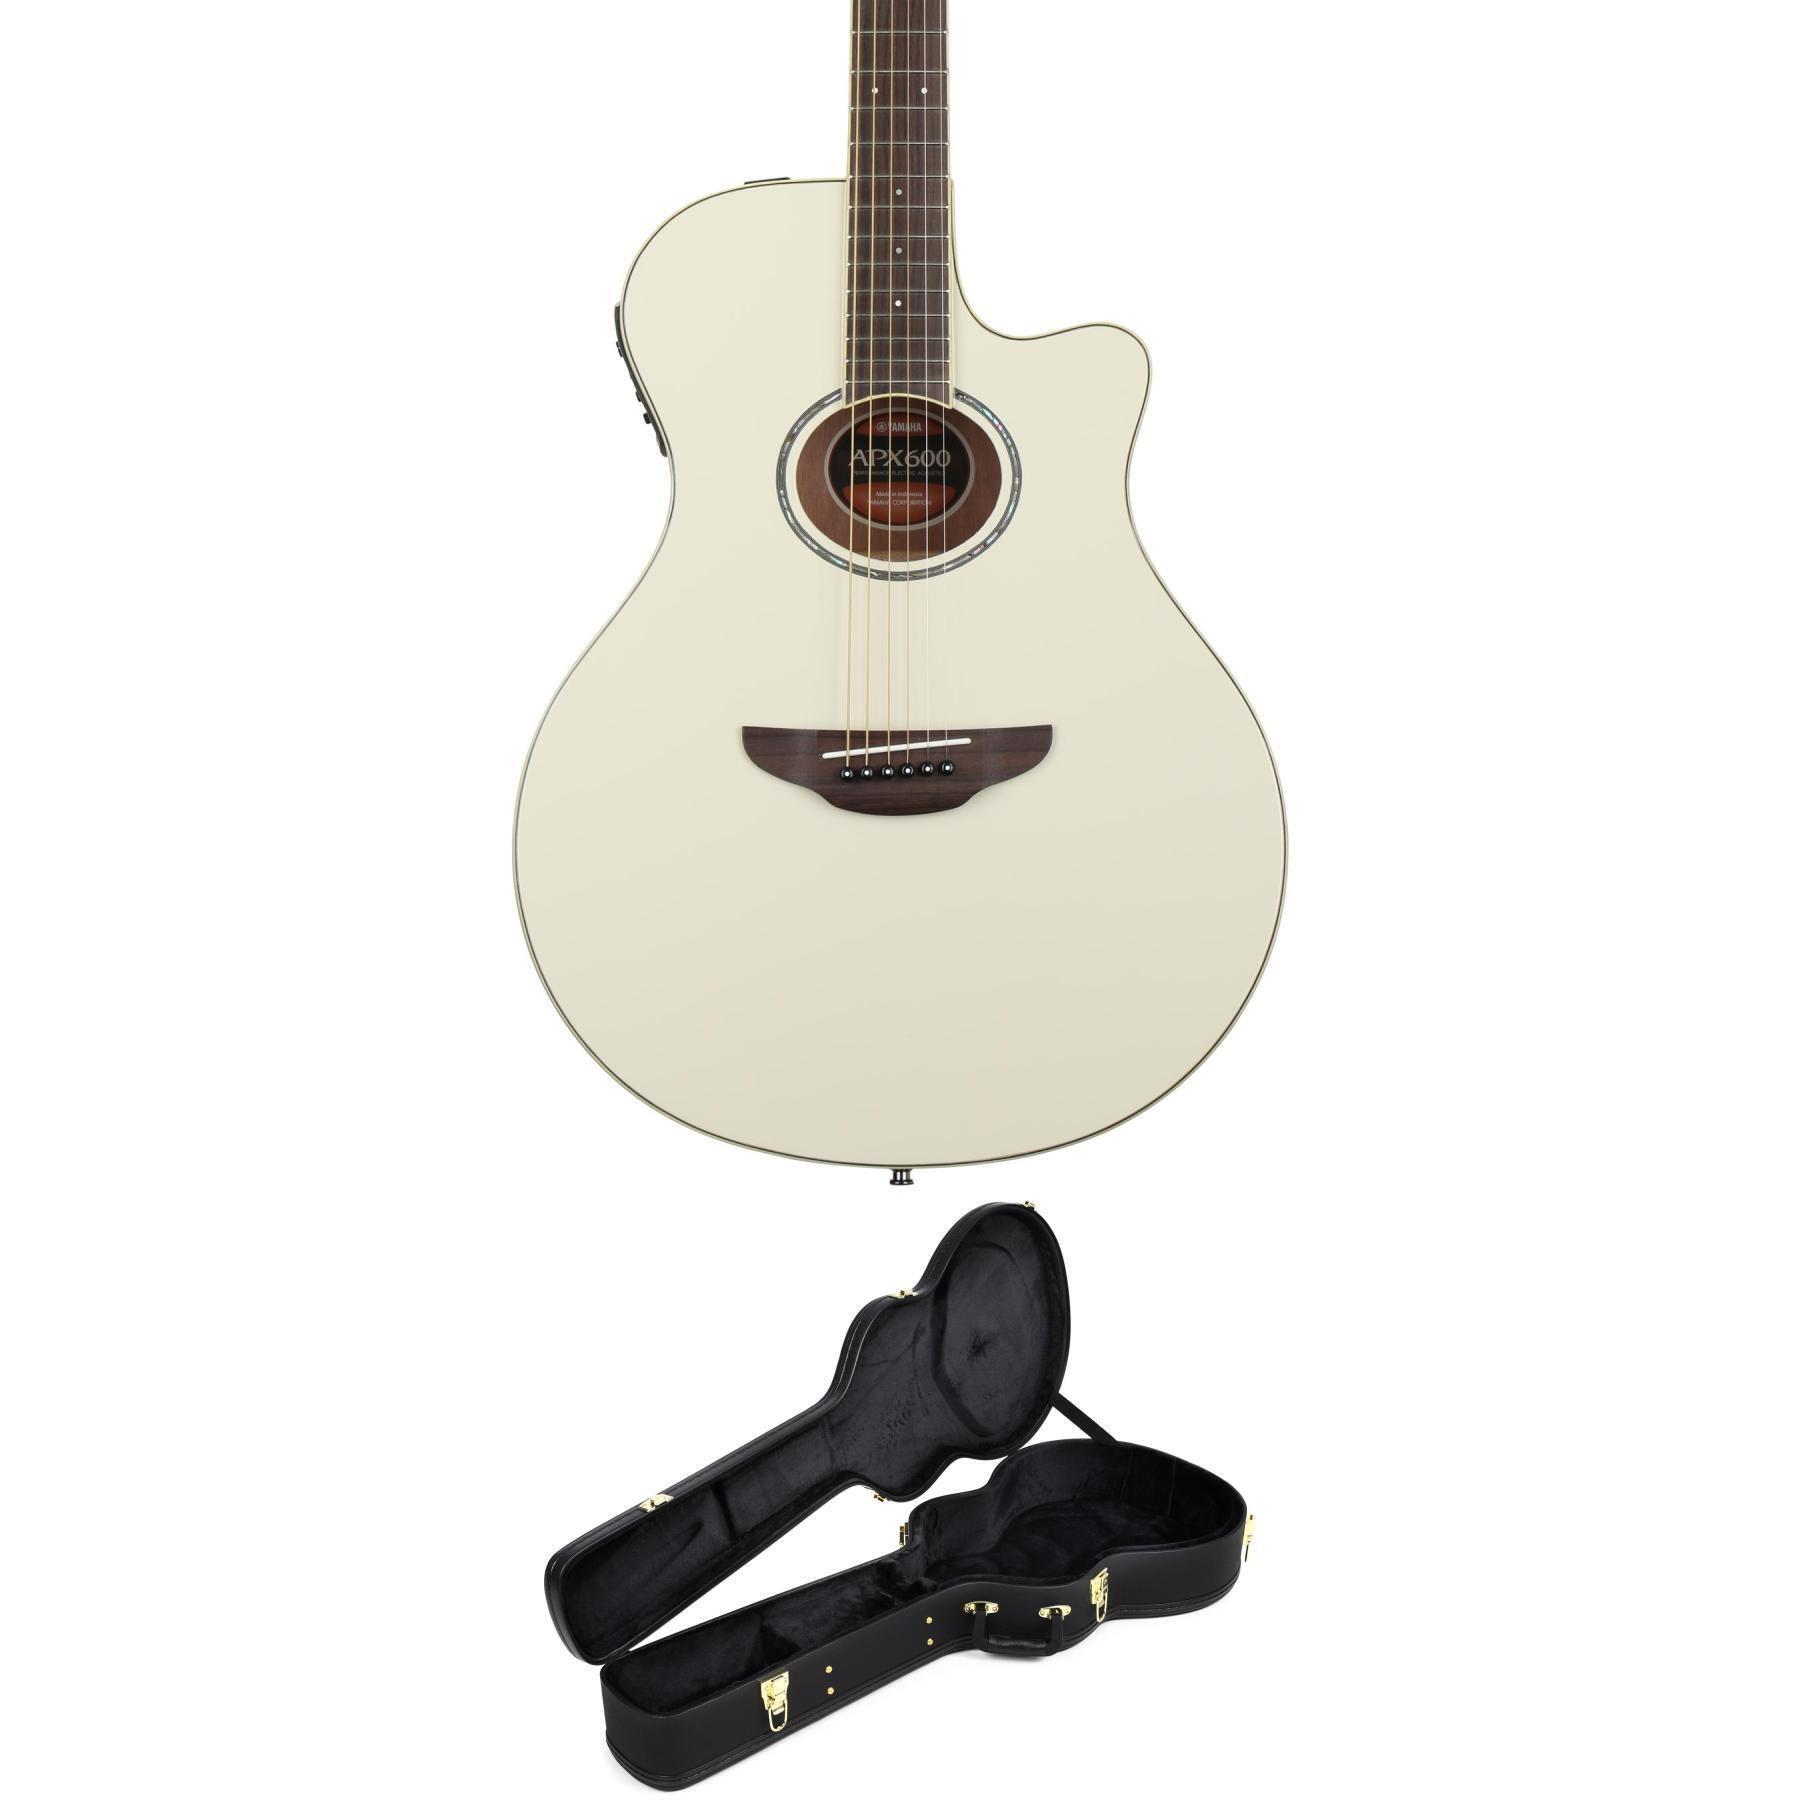 Yamaha APX600 Thin Body Acoustic-Electric Guitar - Vintage White